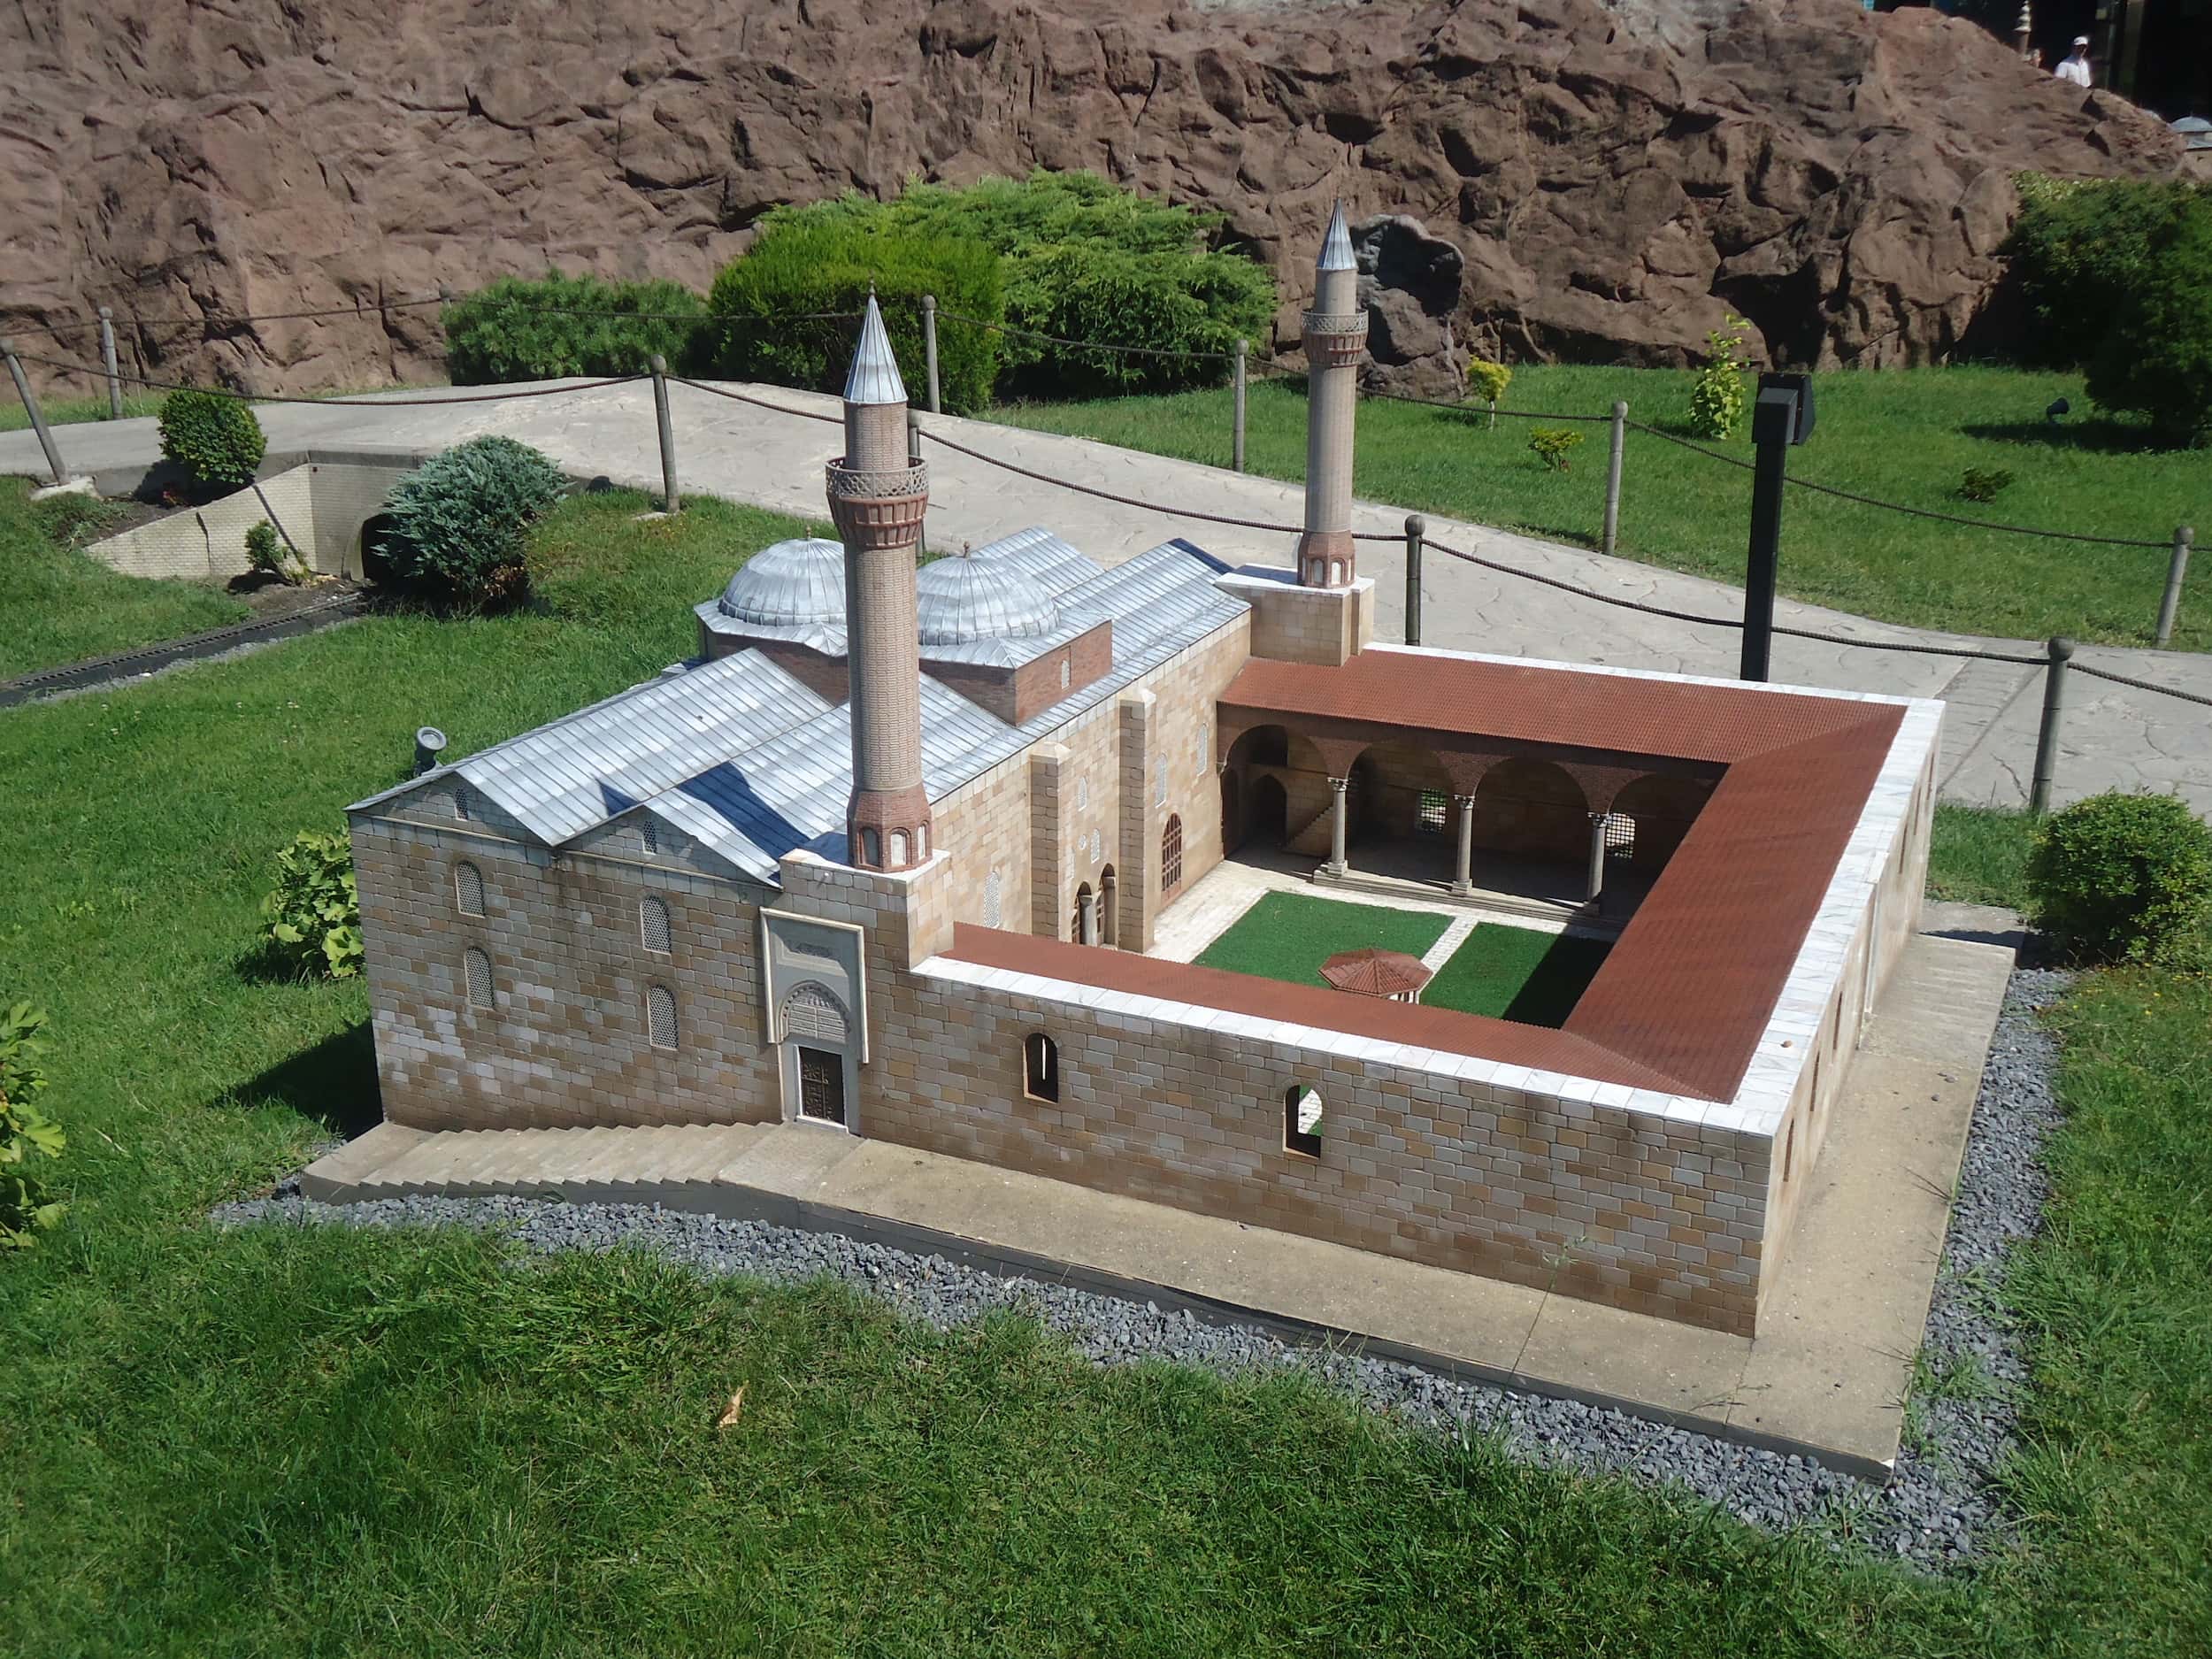 Model of the Isa Bey Mosque, Selçuk, 14th century